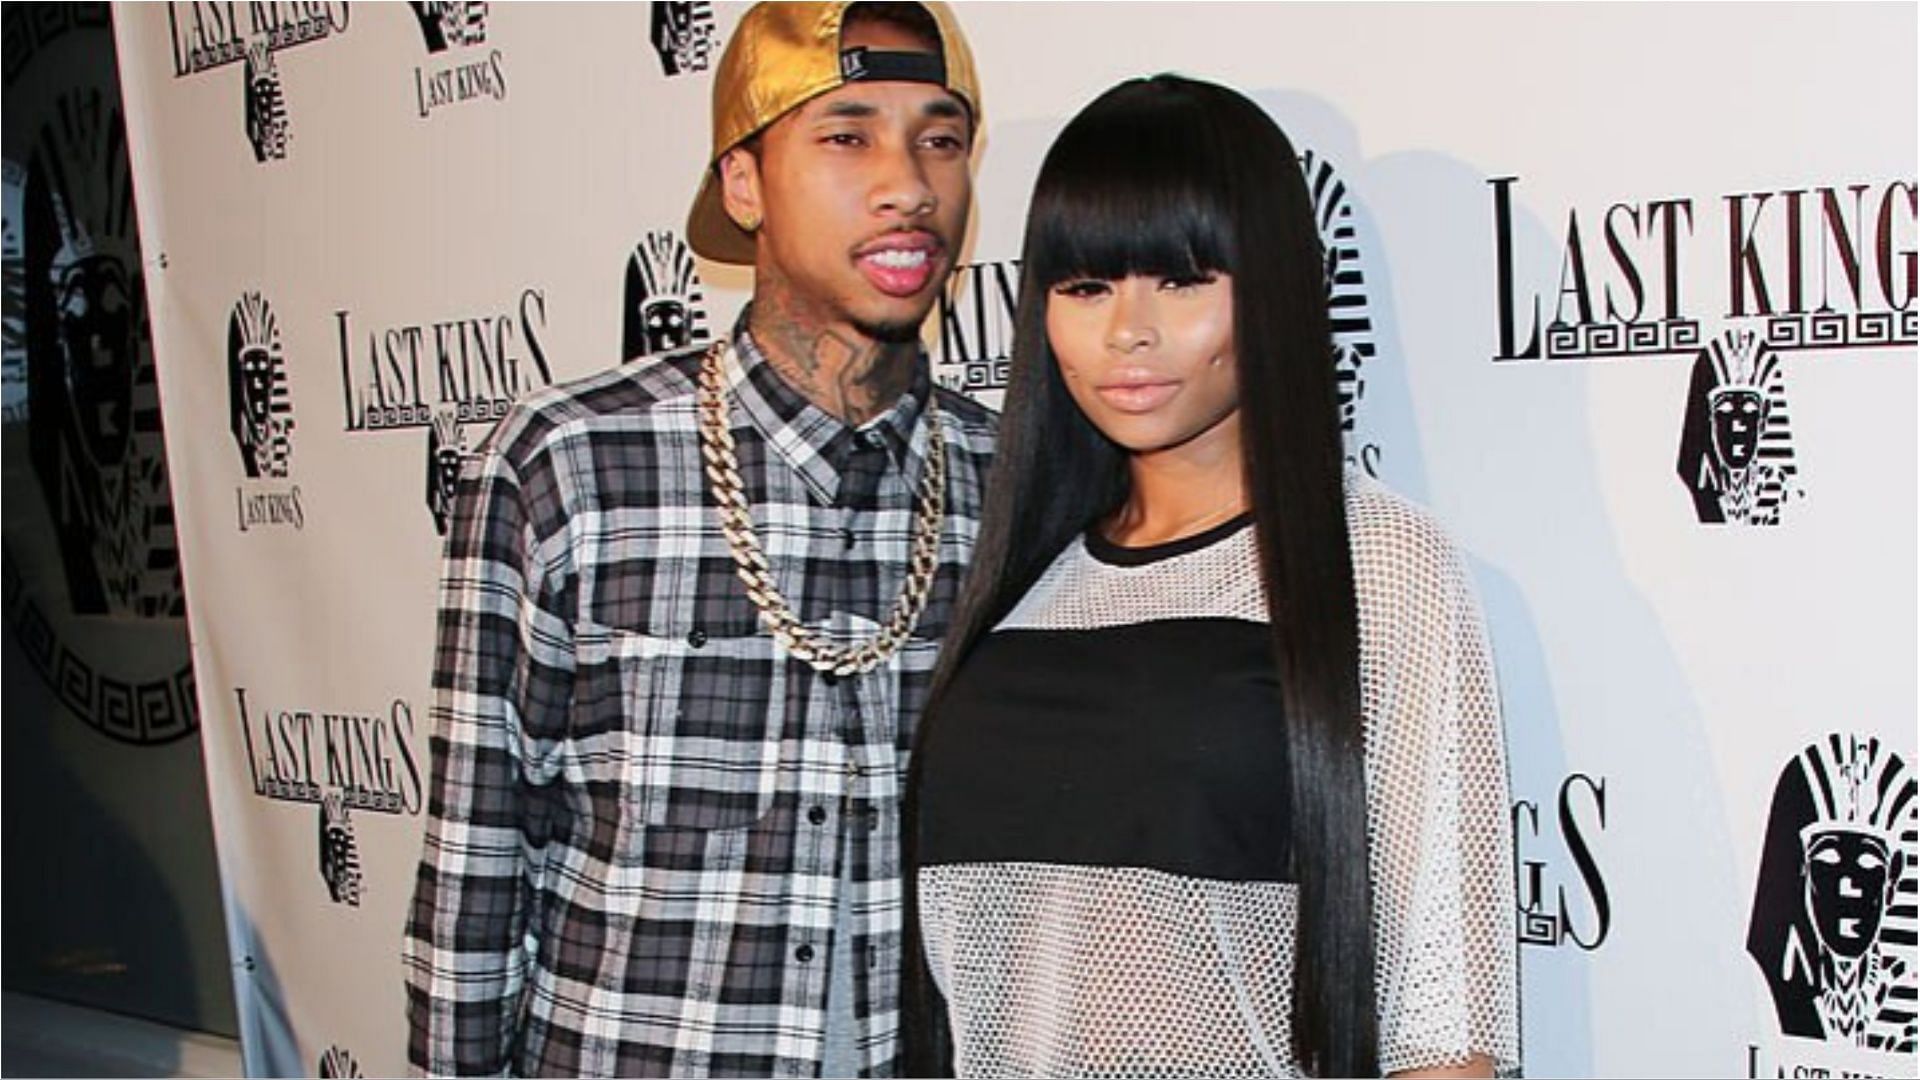 Blac Chyna has sued Tyga to demand for child support (Image via Paul Archuleta/Getty Images)